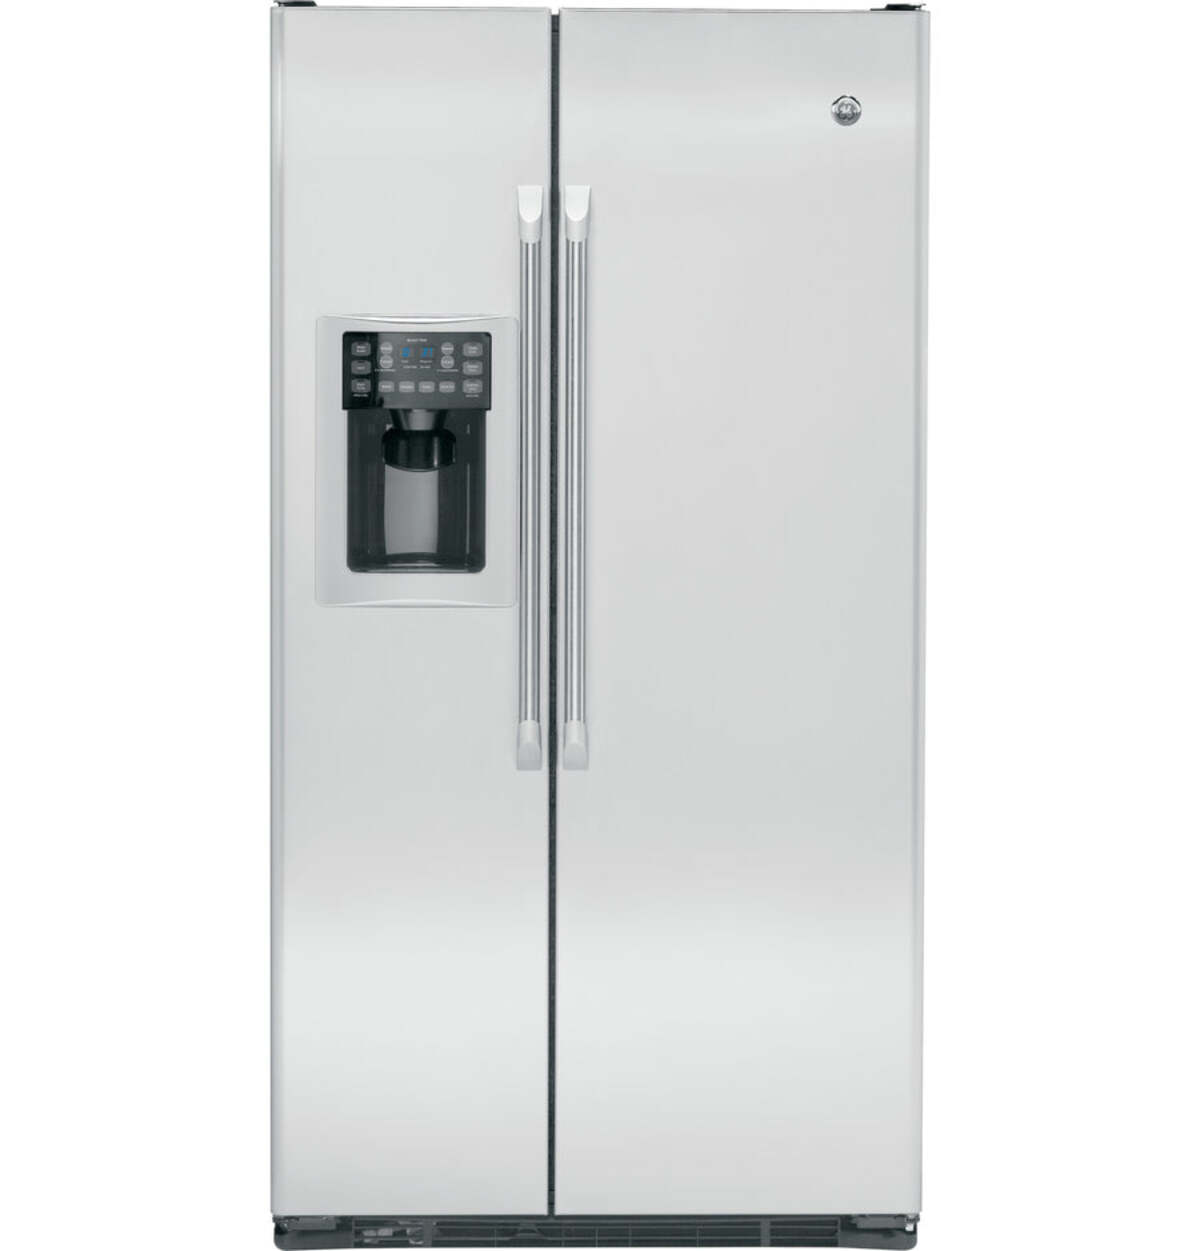 Ge Refrigerator Error Code Ef: Troubleshooting Tips and Solutions